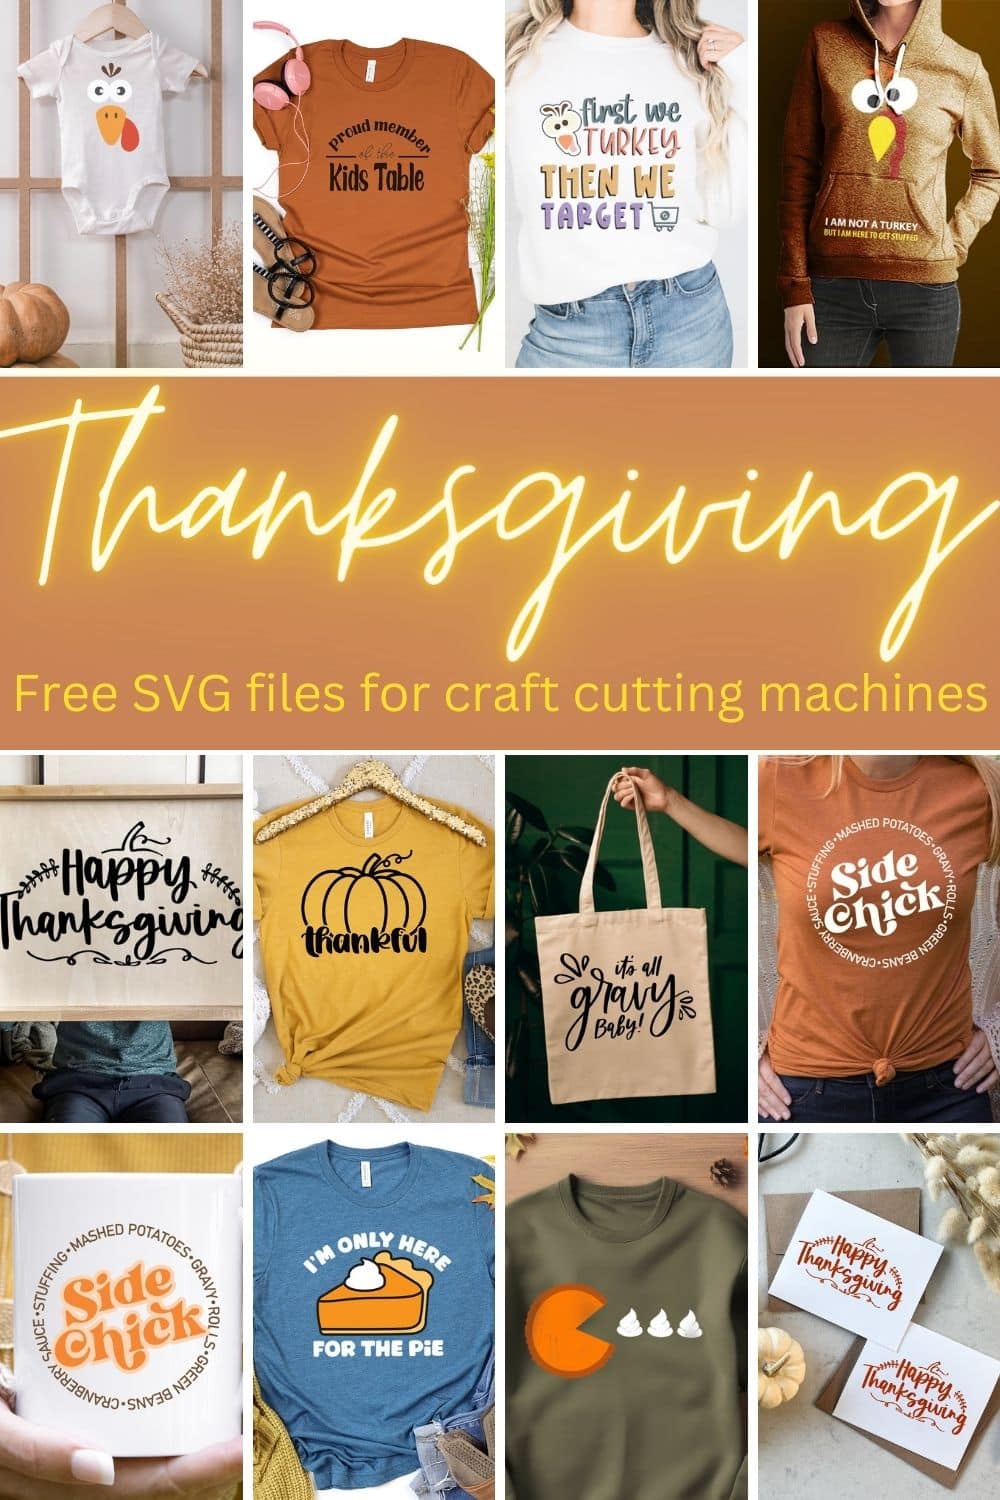 A fun list of free cut files for Thanksgiving. Your Thanksgiving crafting is easy with this list of amazing svg files to use with your cutting machine. Get crafty this Thanksgiving season.